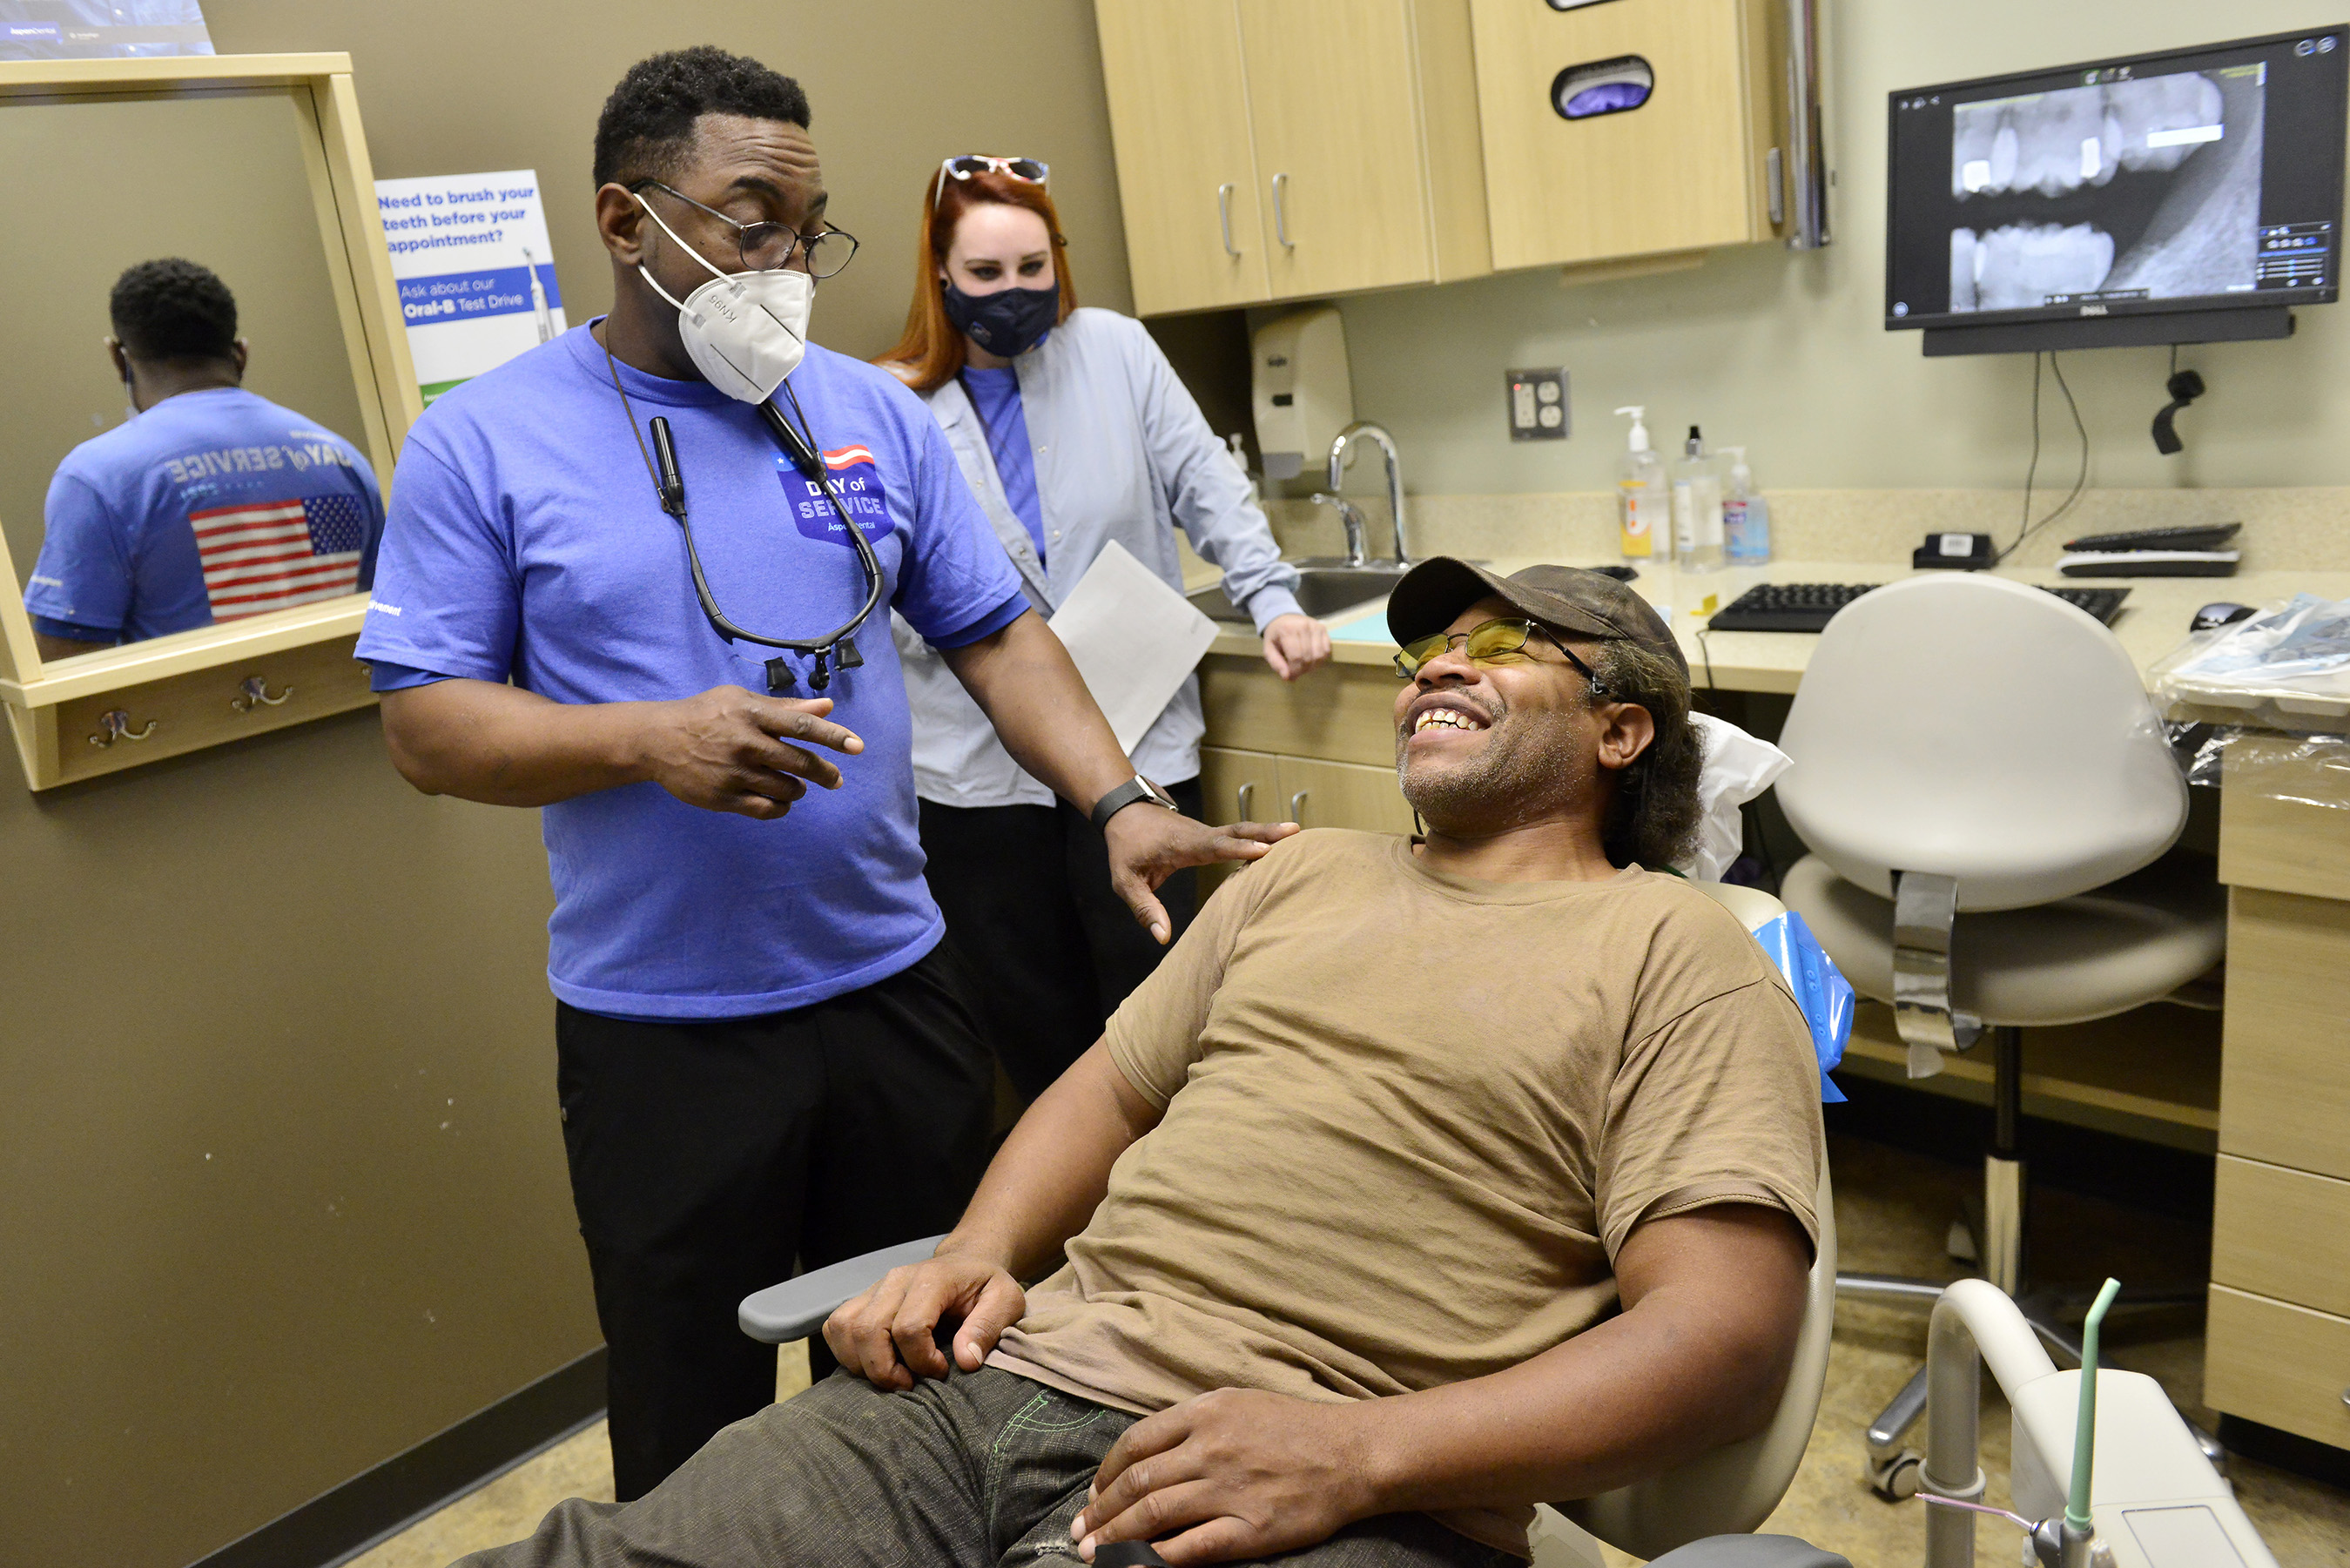 The Aspen Dental team provides free care to veterans and their families during the Aspen Dental's 7th Annual Day of Service, on Saturday, Nov. 6, 2021, in Millington, Tenn. (Brandon Dill/AP Images for Aspen Dental)